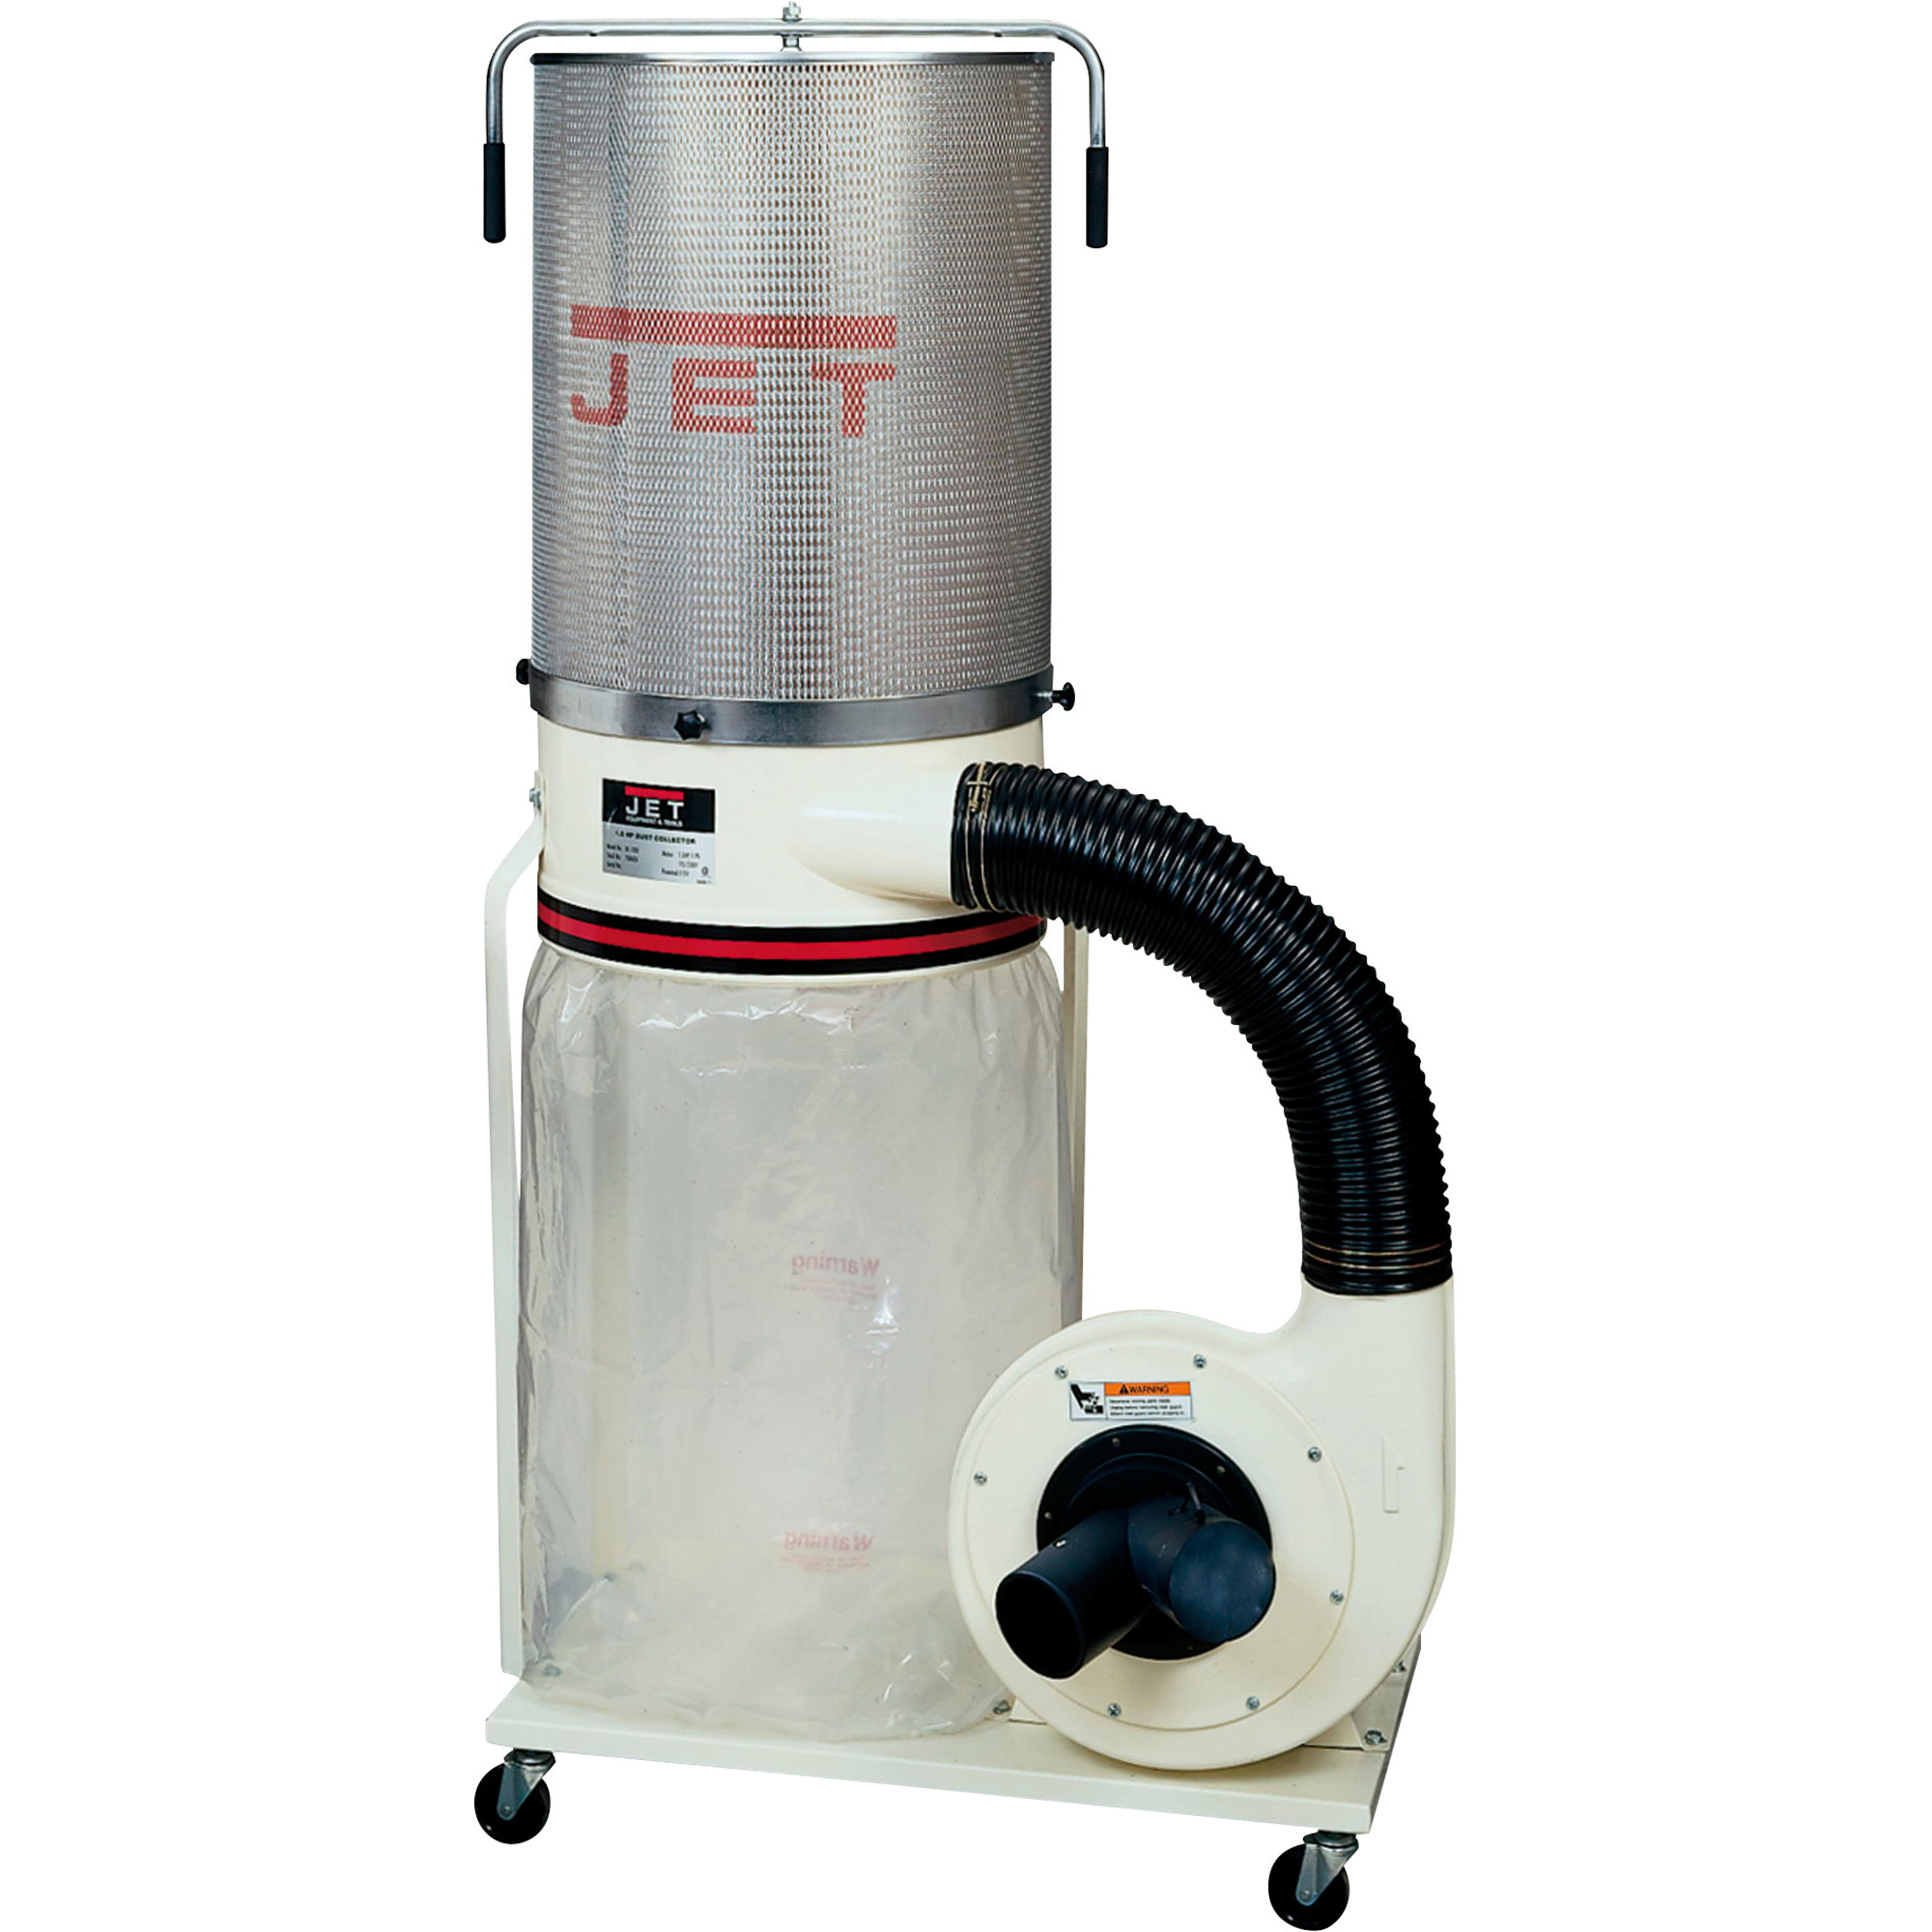 JET Vortex Cone Dust Collector, 2 HP, 1-Phase, 230 Volt, 2-Micron Canister Kit, Model DC-1200VX-CK1